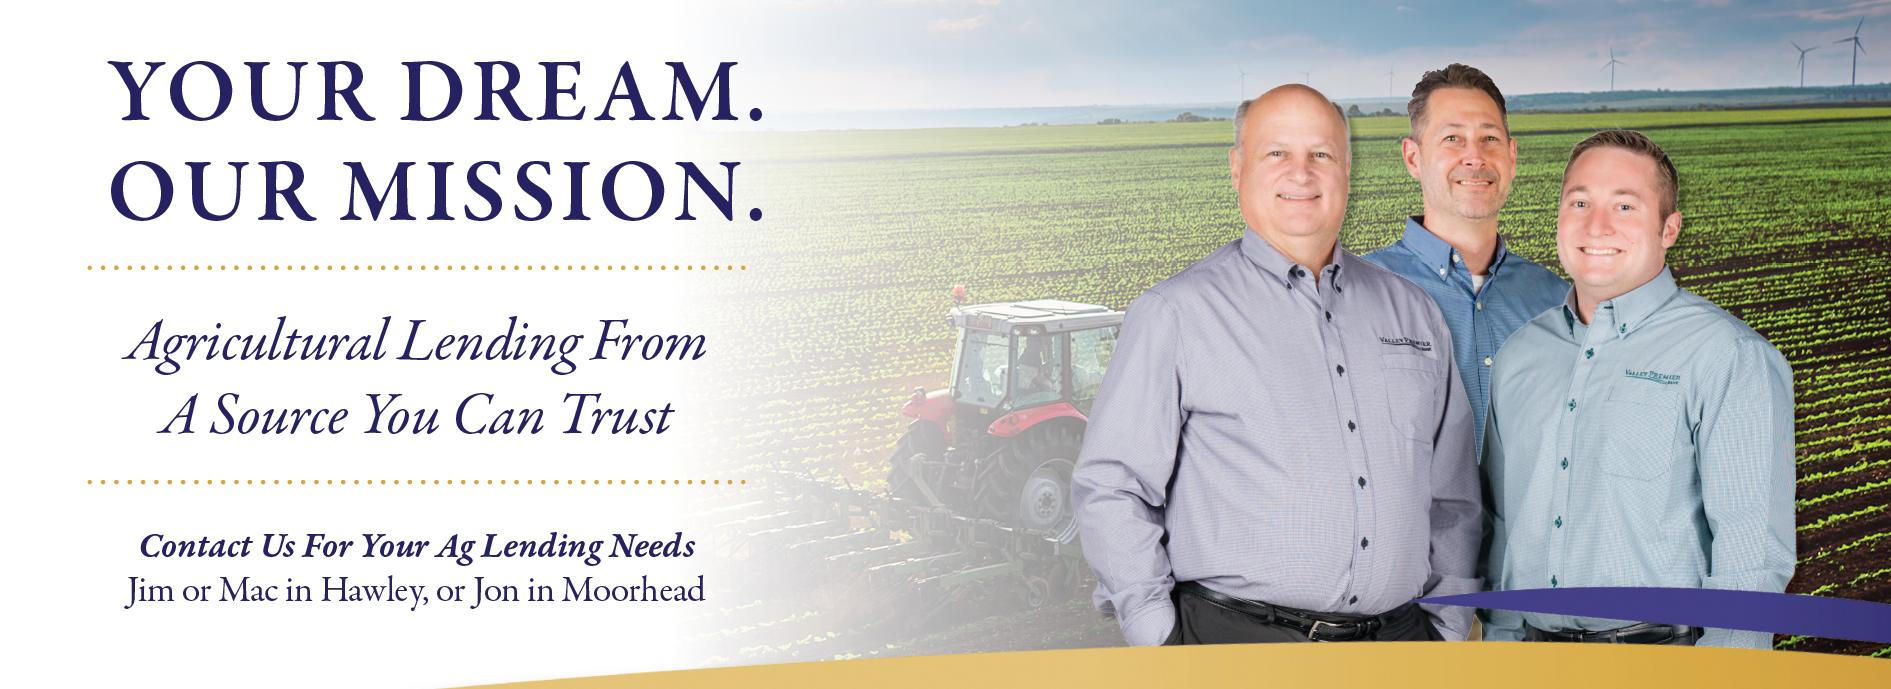 Your Dream. Our Mission.  Agricultural Lending From A Source You Can Trust.  Contact Us For Your Ag Lending Needs. Jim or Mac in Hawley or Jon in Moorhead.  Image of a tractor in a field with the three lenders.